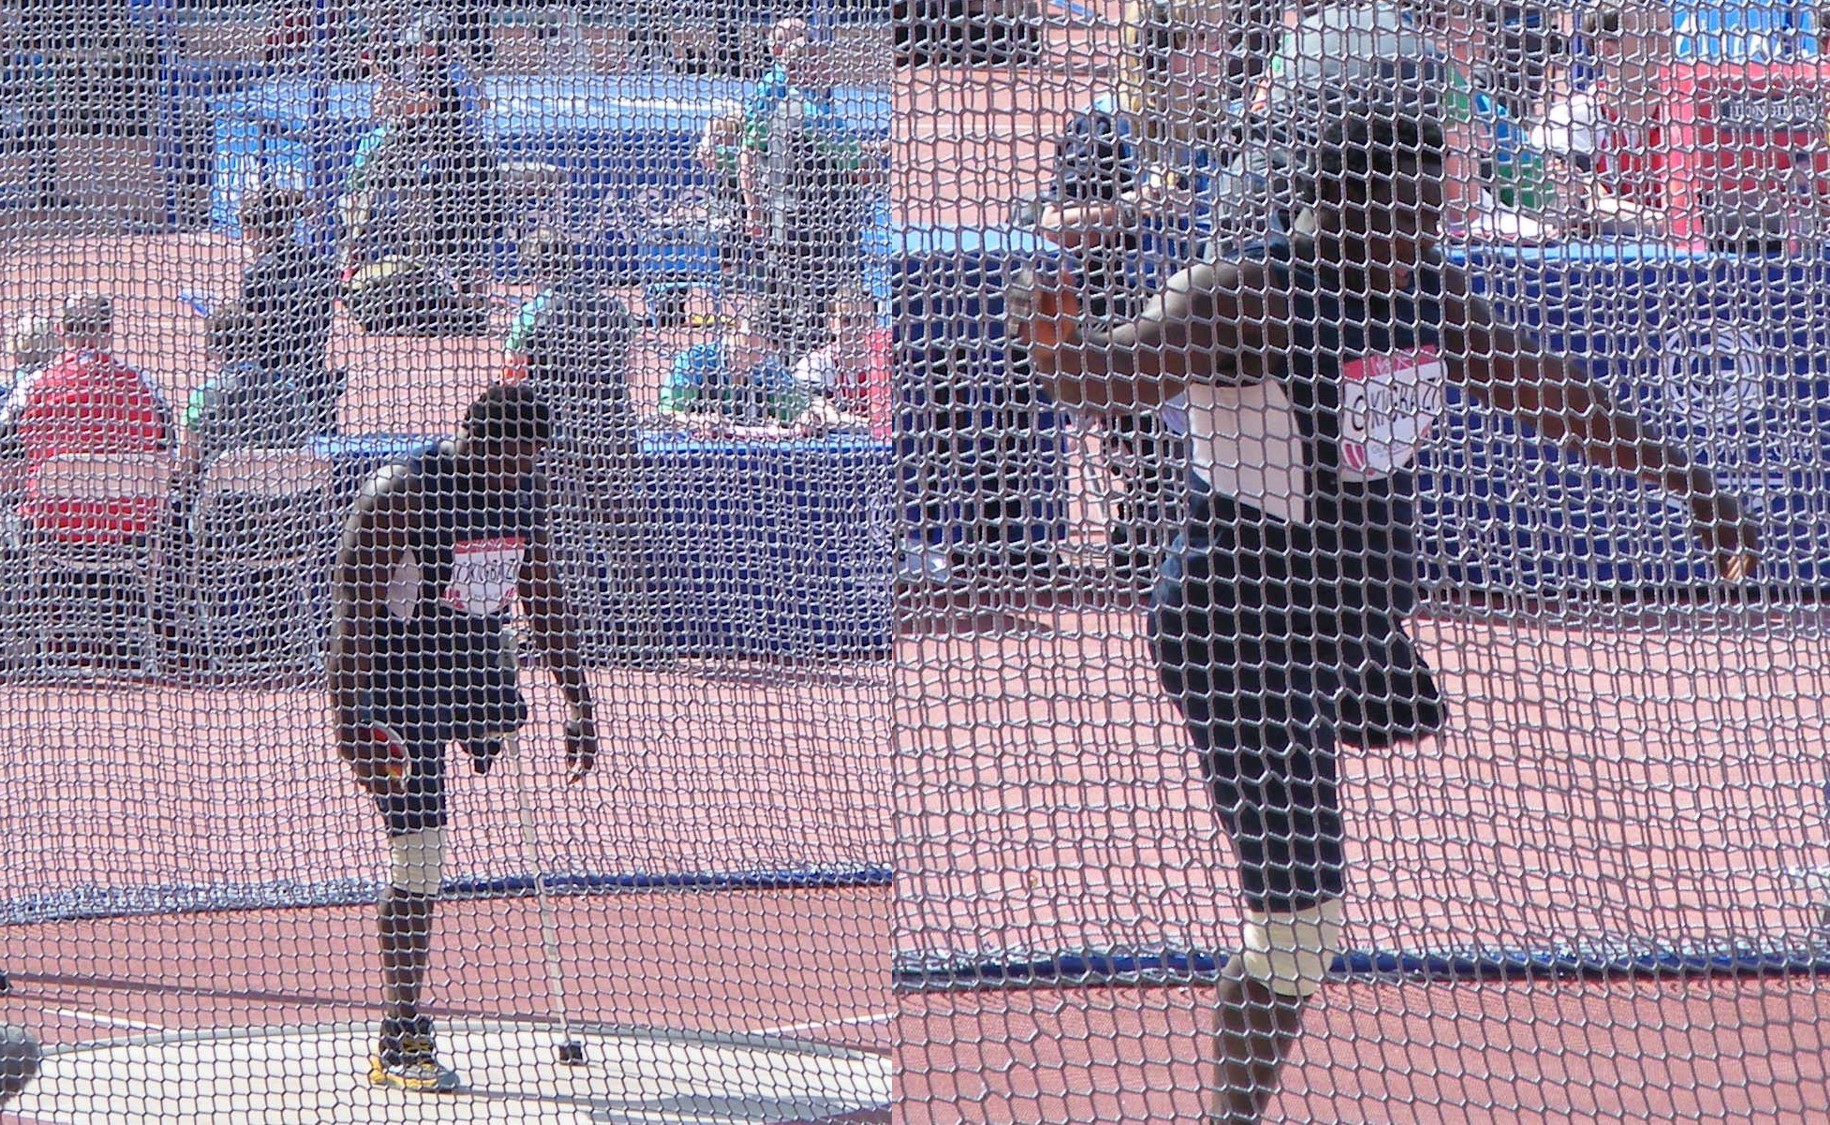 The Labours of our Para-Athletes must not be forgotten. Richard Okigbazi won BRONZE  by throwing 39.38 metres in the F42/44 Discus - THROWING ON JUST ONE LEG! (Photo Credit: mitheringsfrommorningside.wordpress.com)